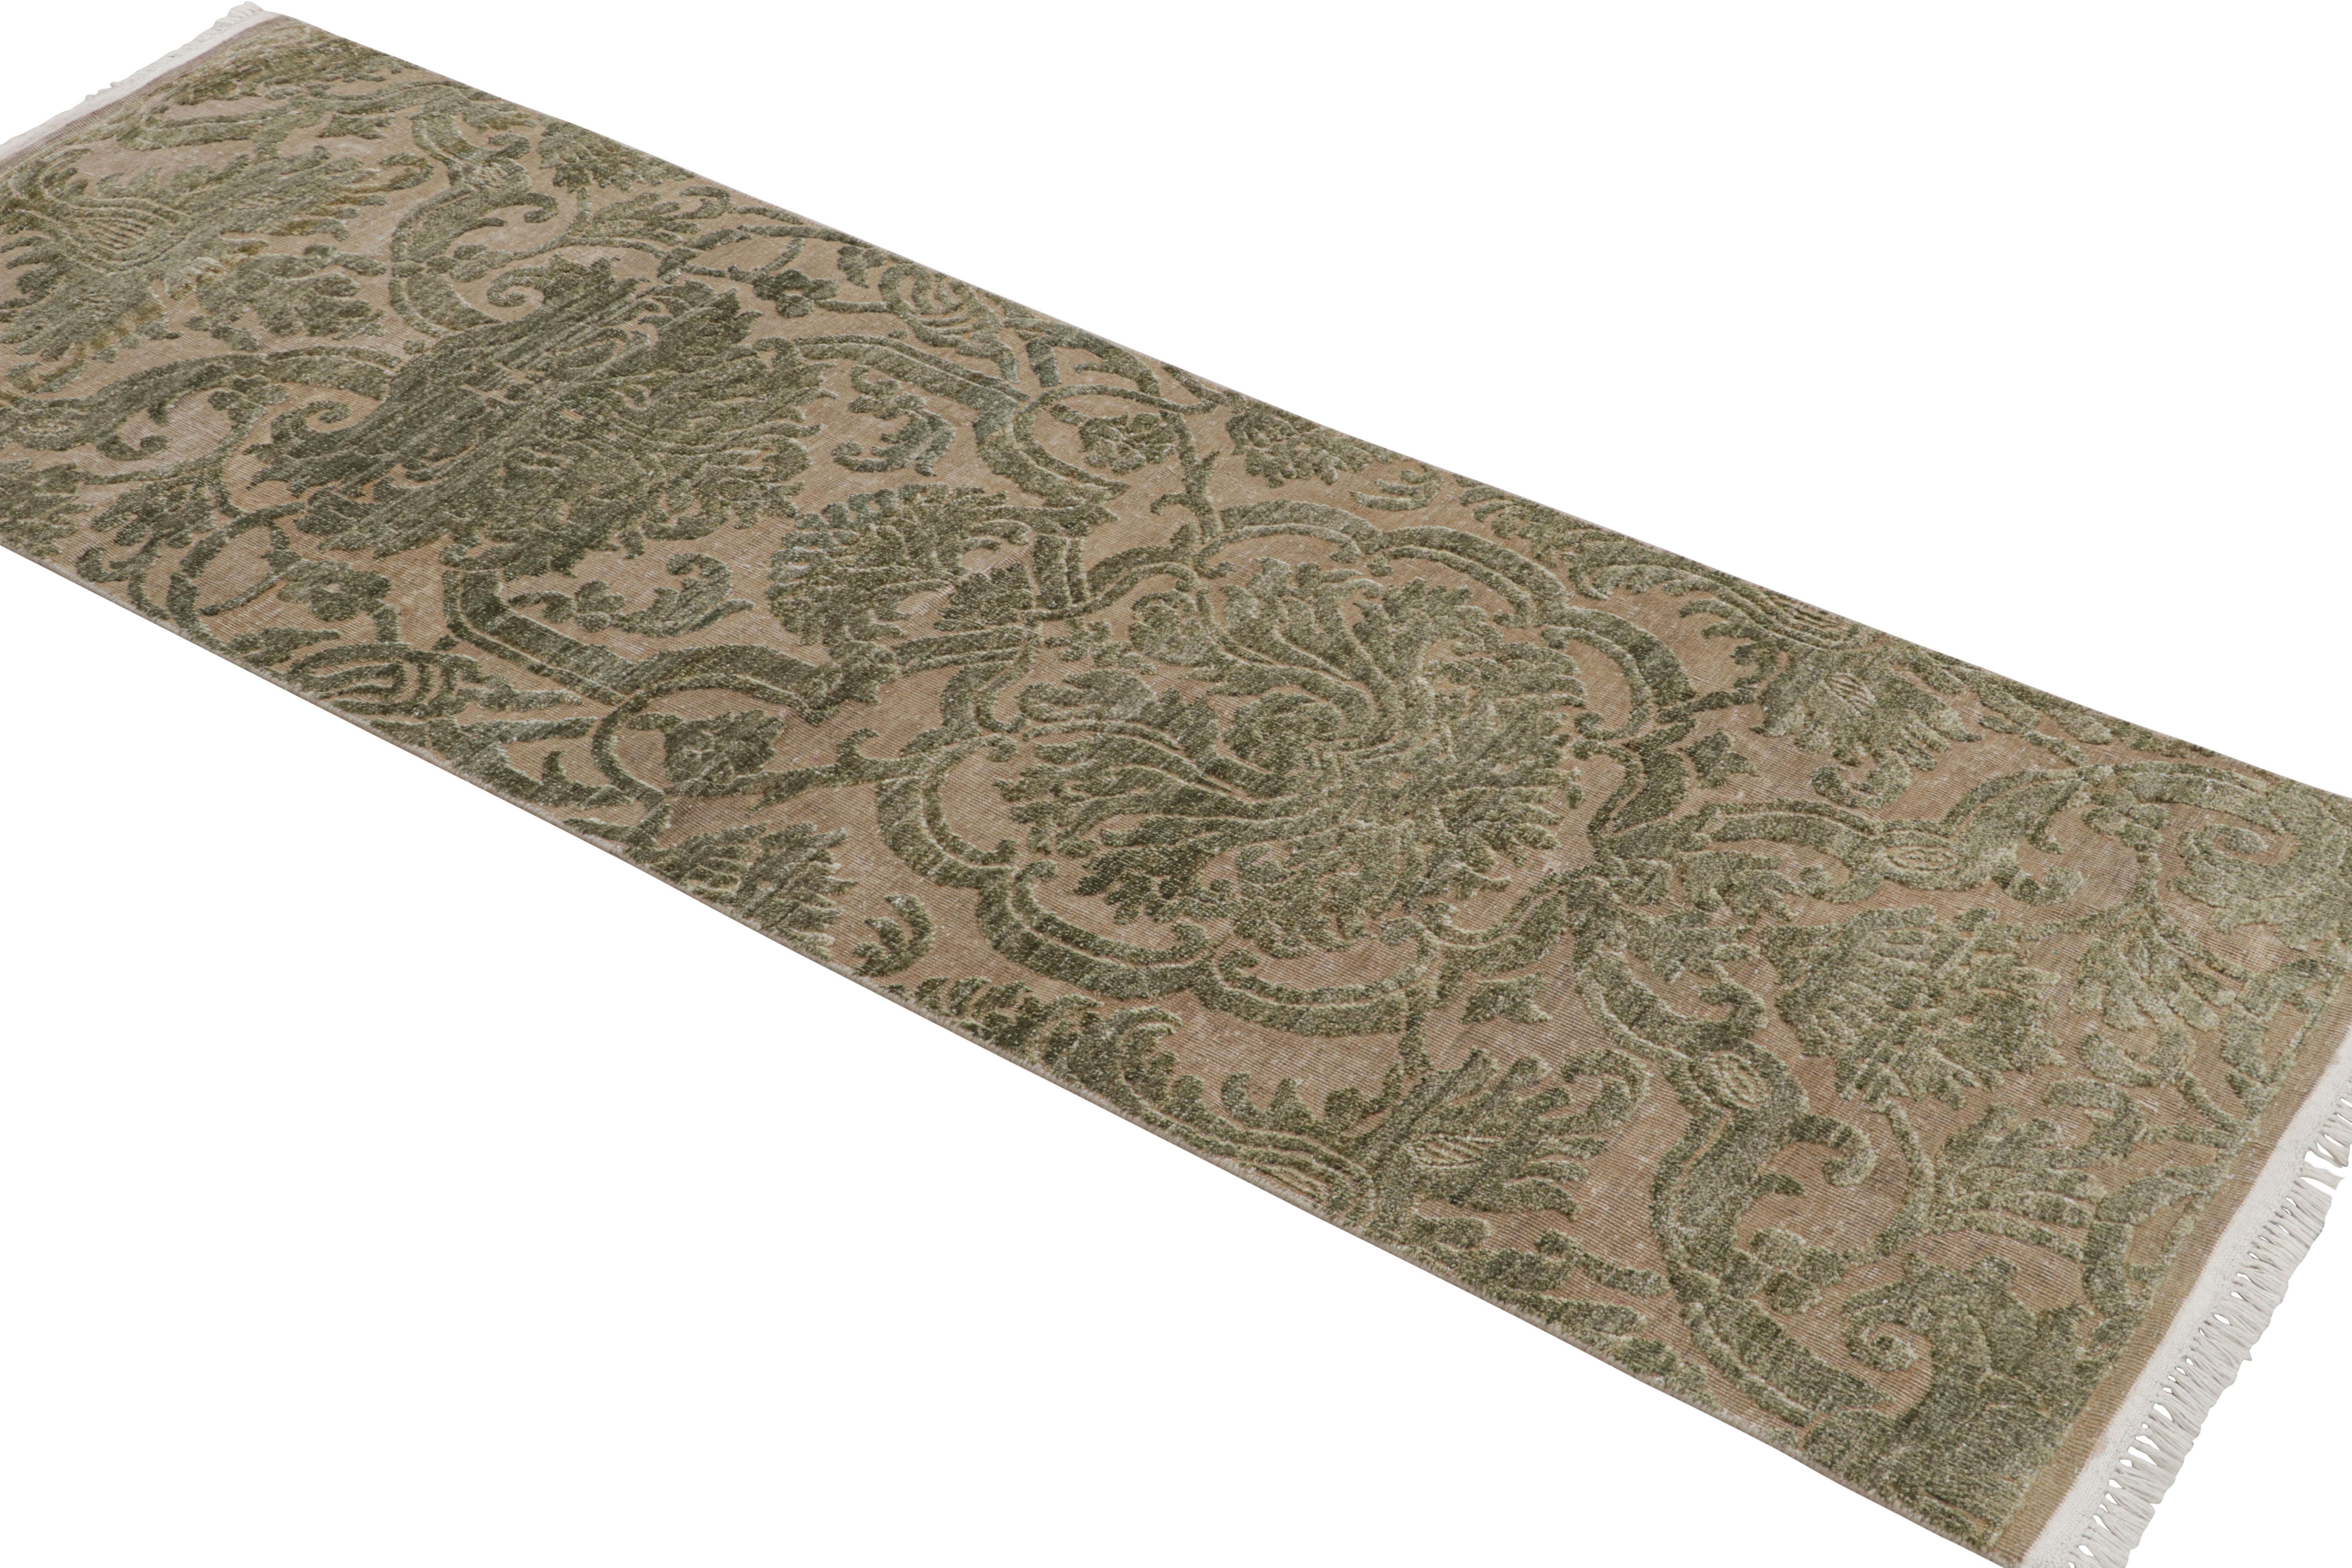 Hand-knotted in wool and silk, this 3x8 runner is from the European rug collection by Rug & Kilim–a contemporary take on tasteful classic styles. 

On the Design:

The rug enjoys beige tones underscoring green floral patterns - particularly sage and